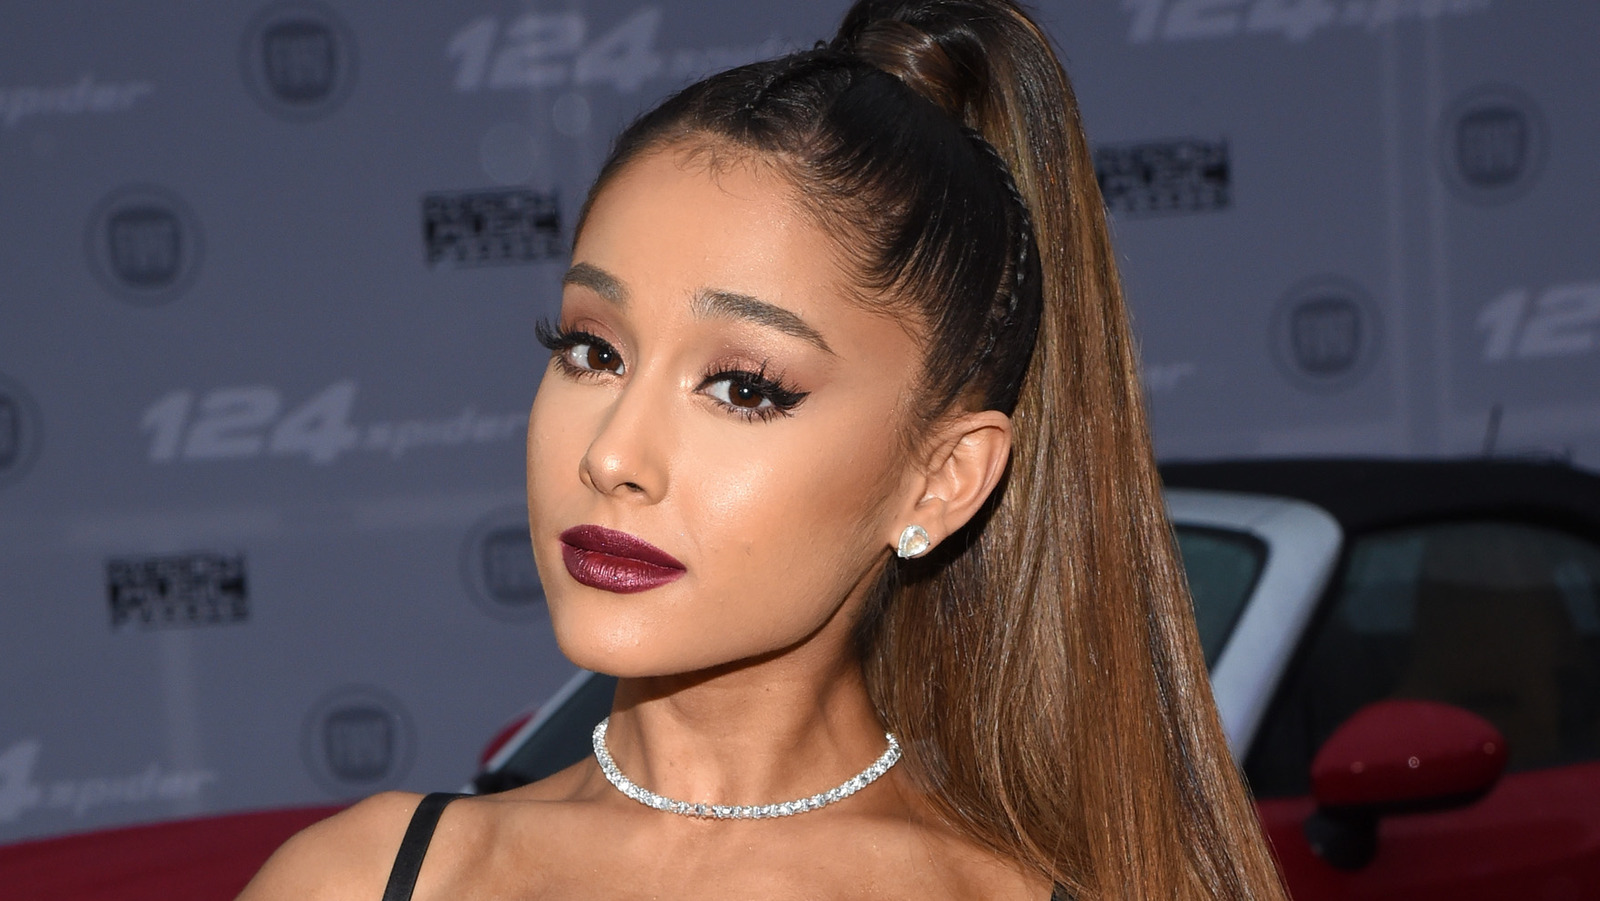 the cosmetic procedures ariana grande admits to getting